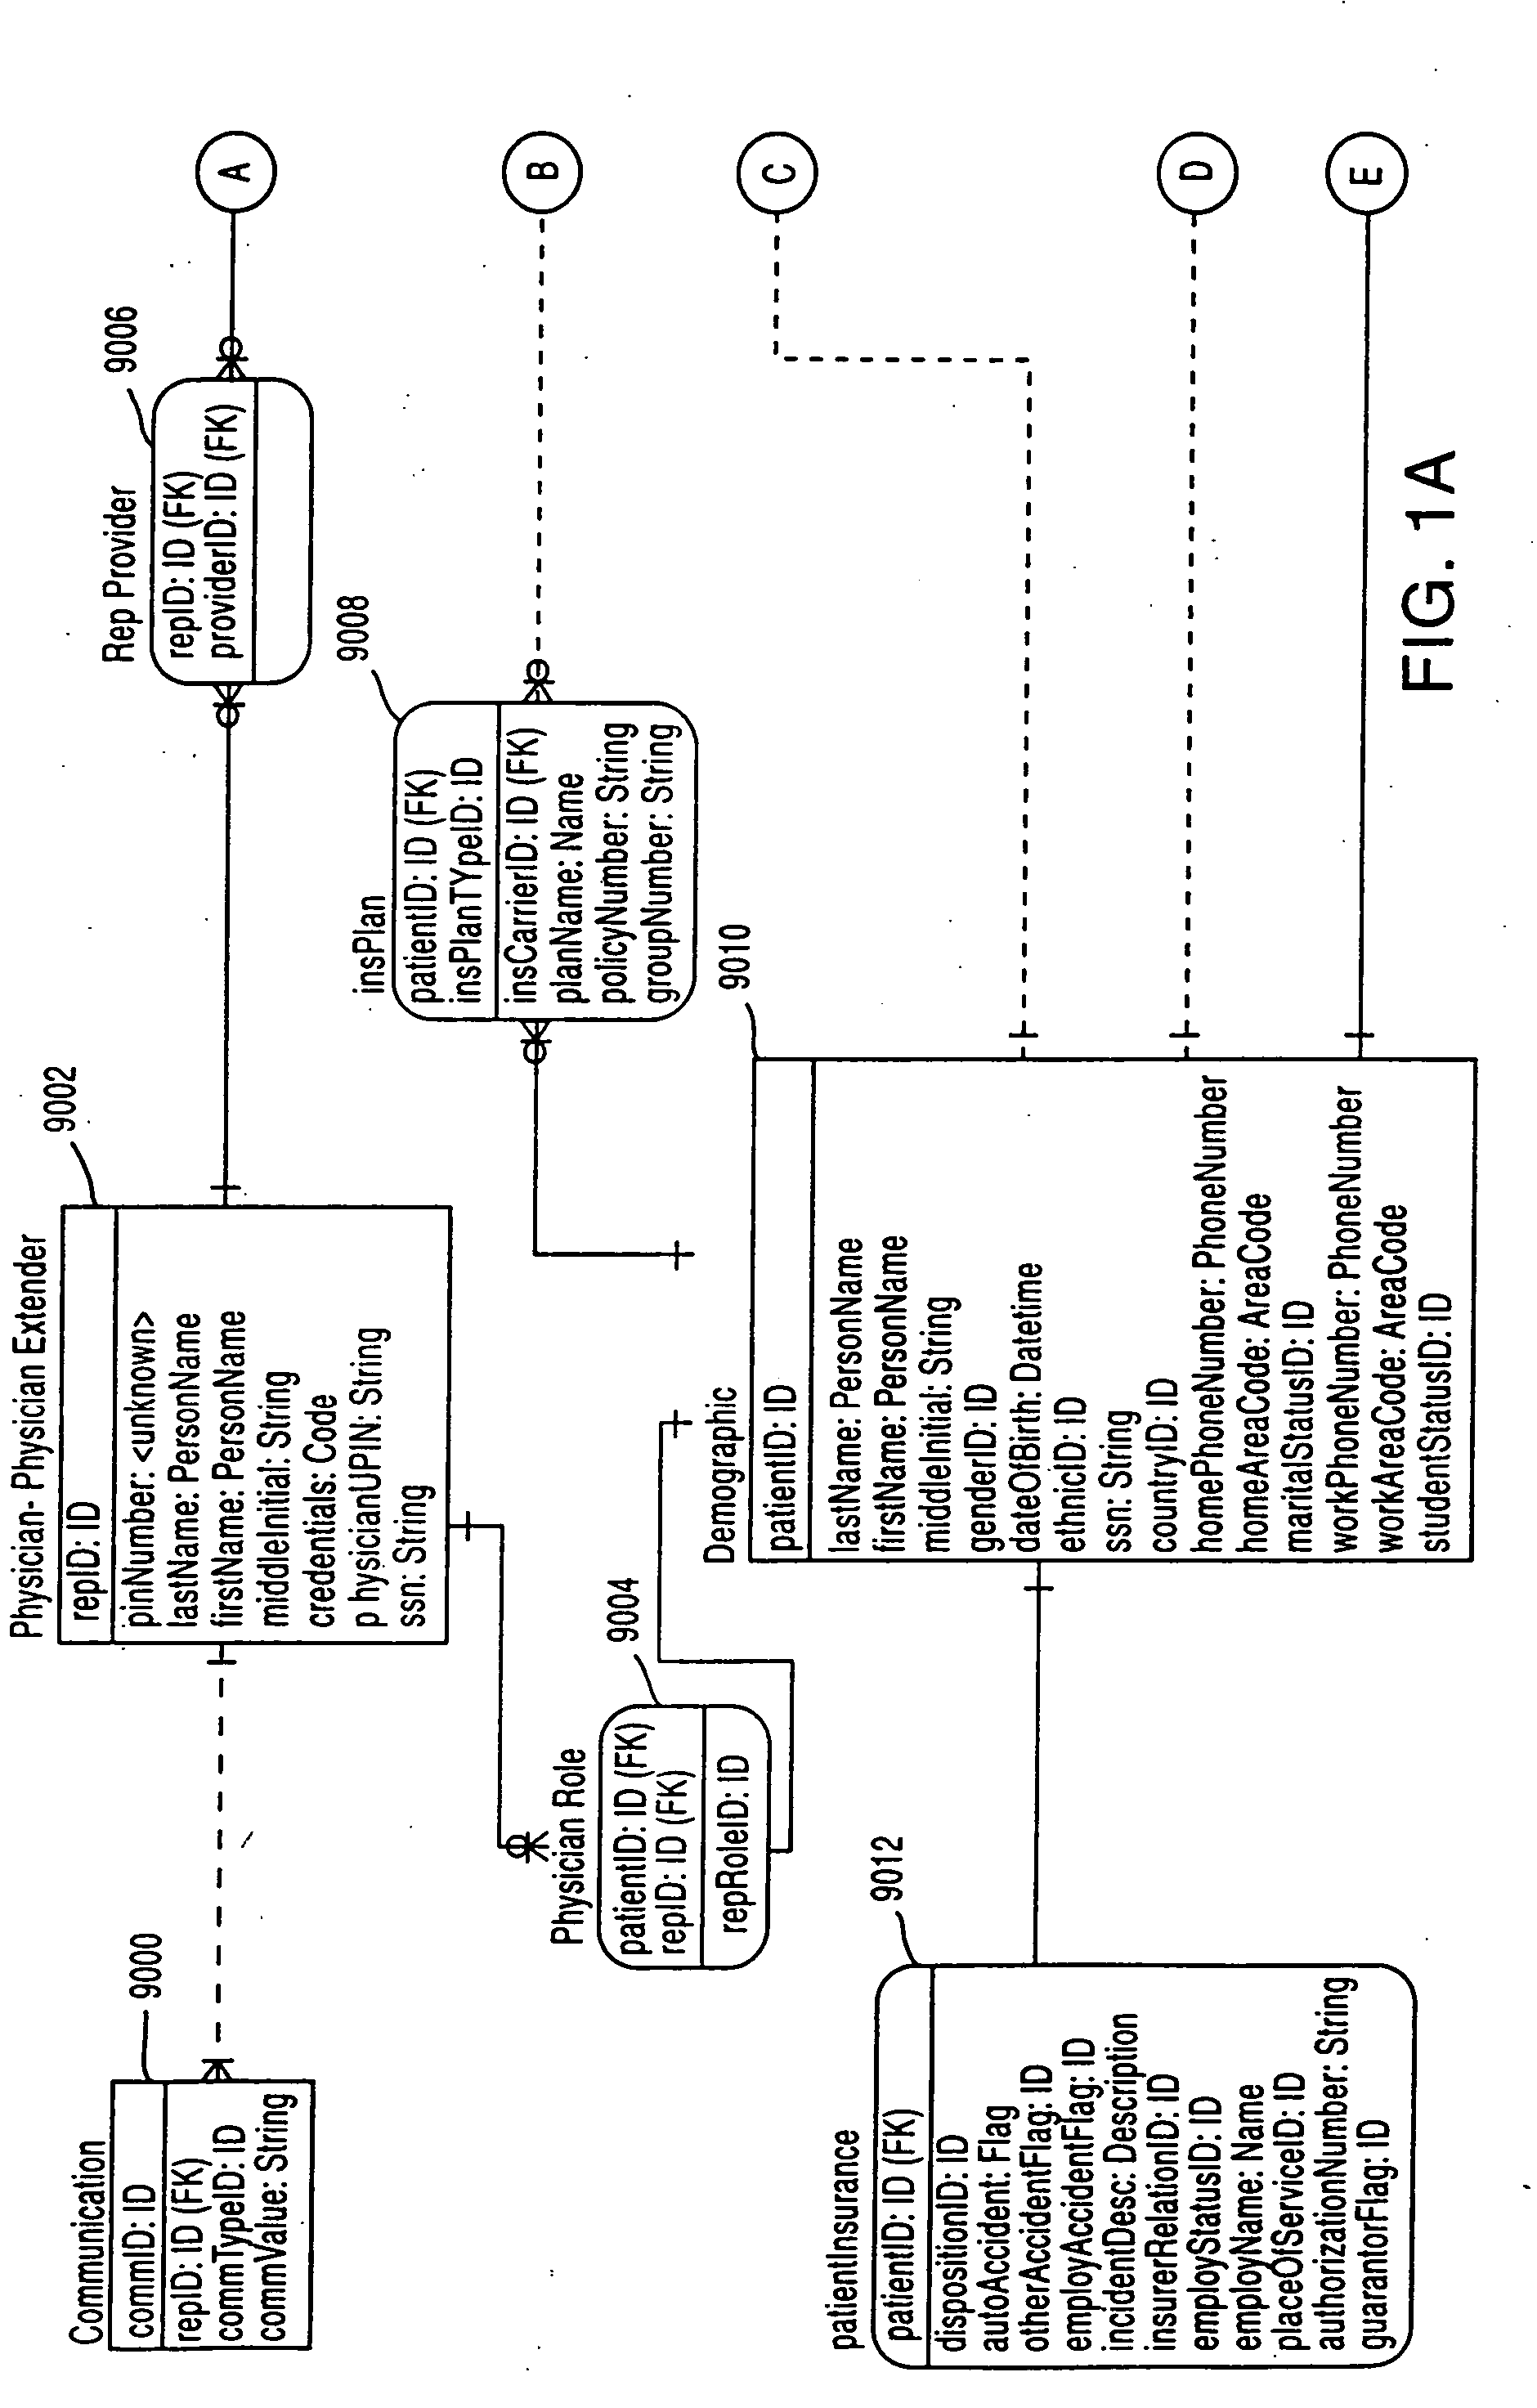 System and method for accounting and billing patients in a hospital environment